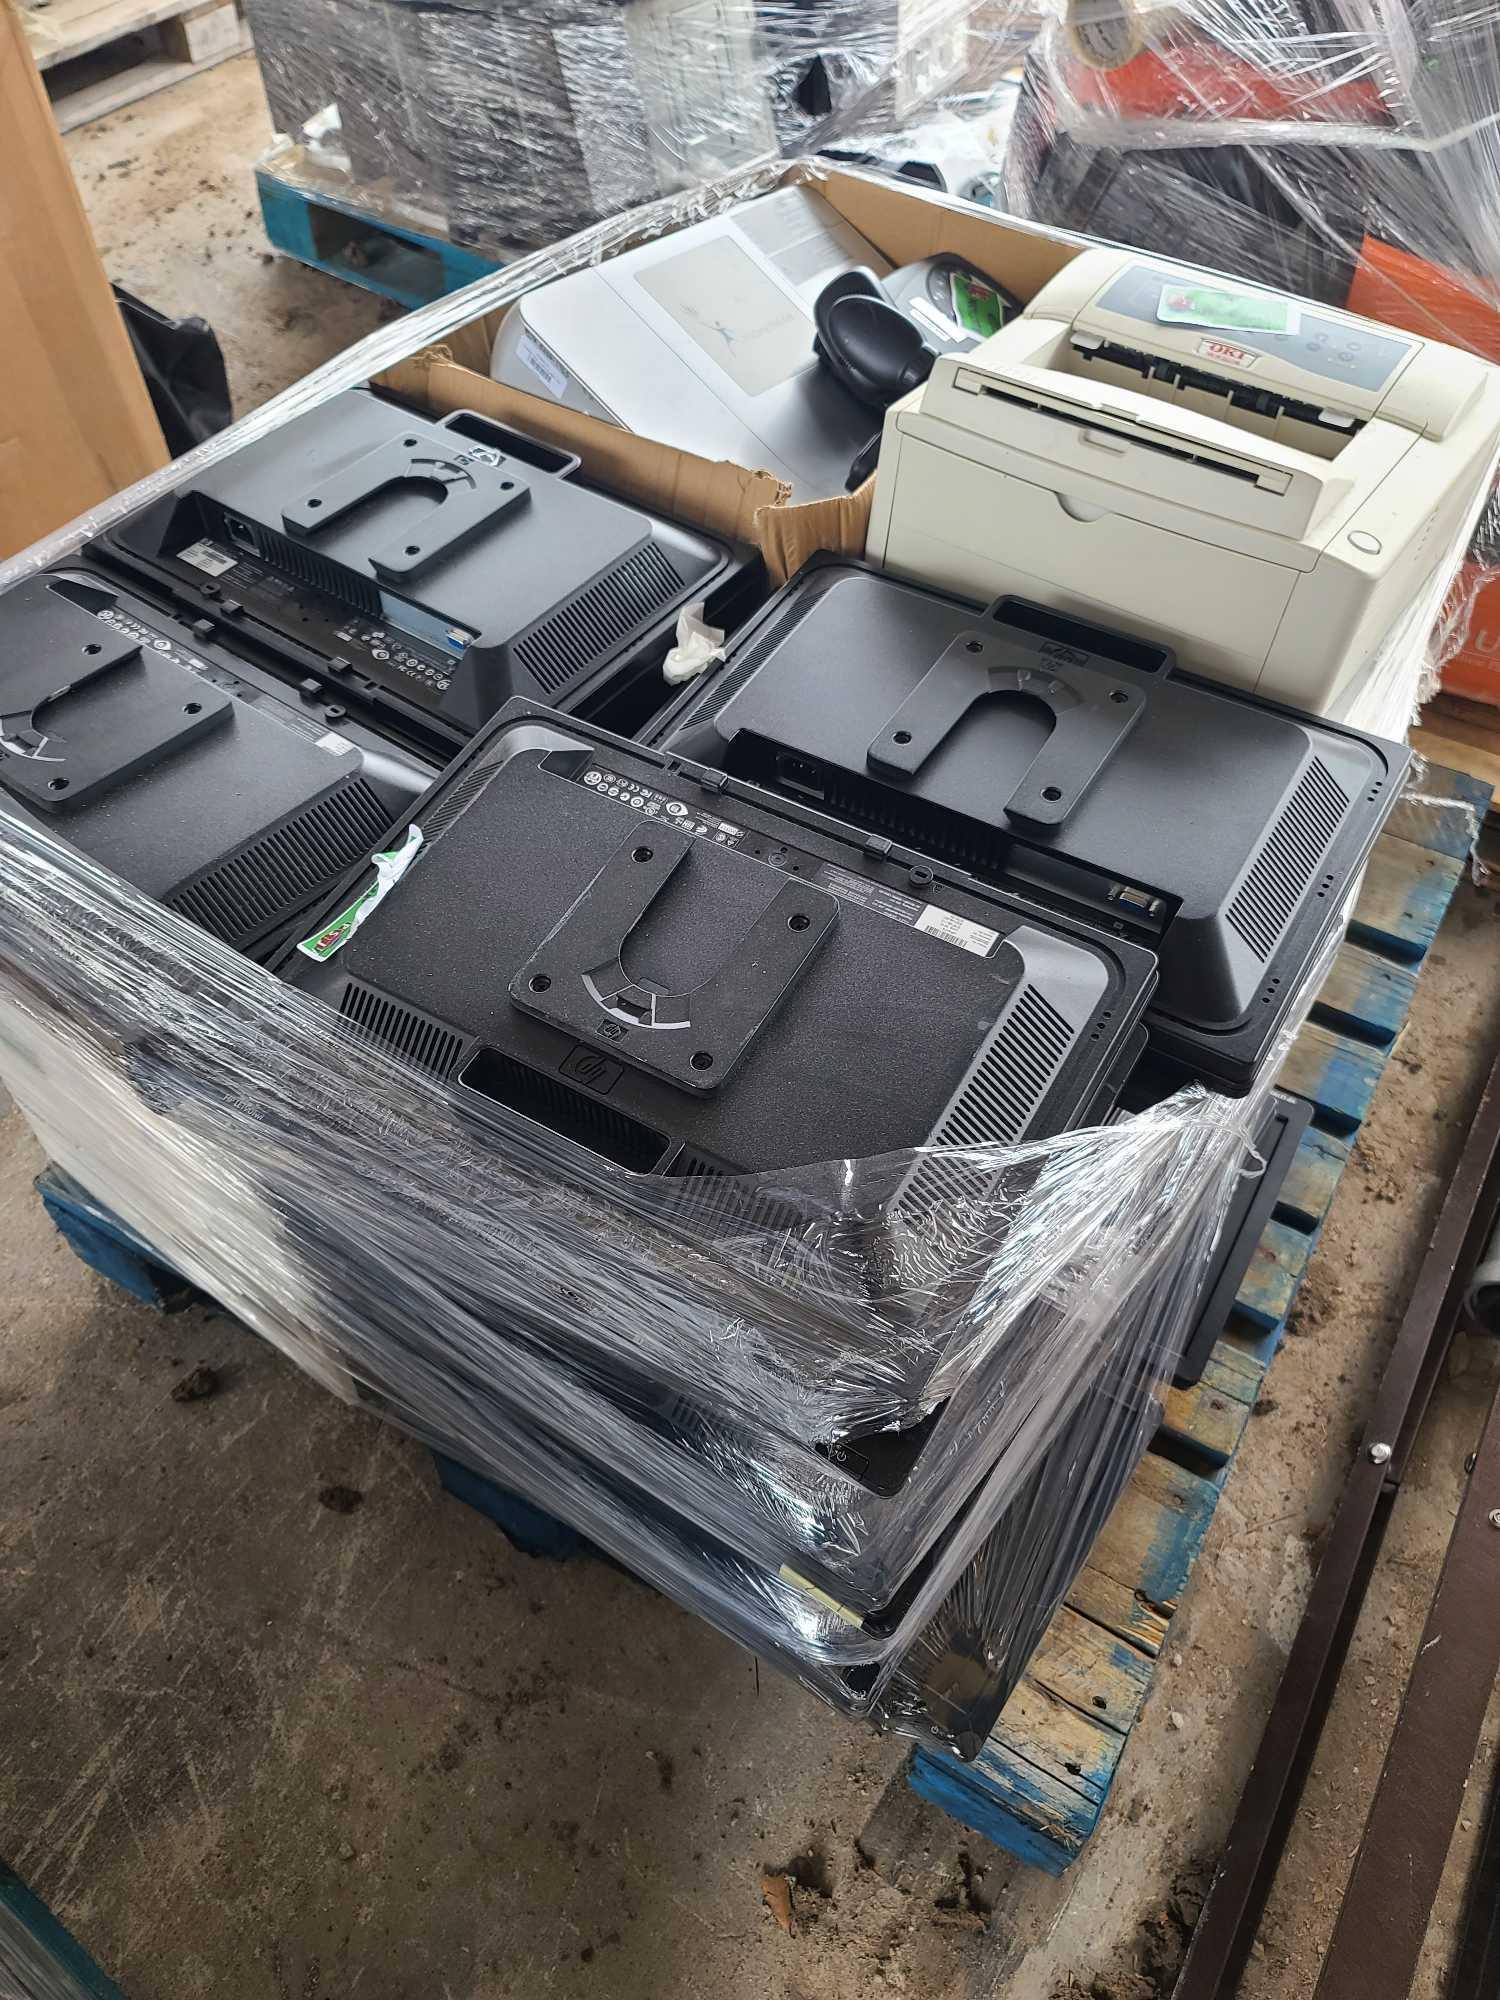 Group of Keyboards, Group of Monitors, Group of Marquee Office Paper, Group of Printers, Plus